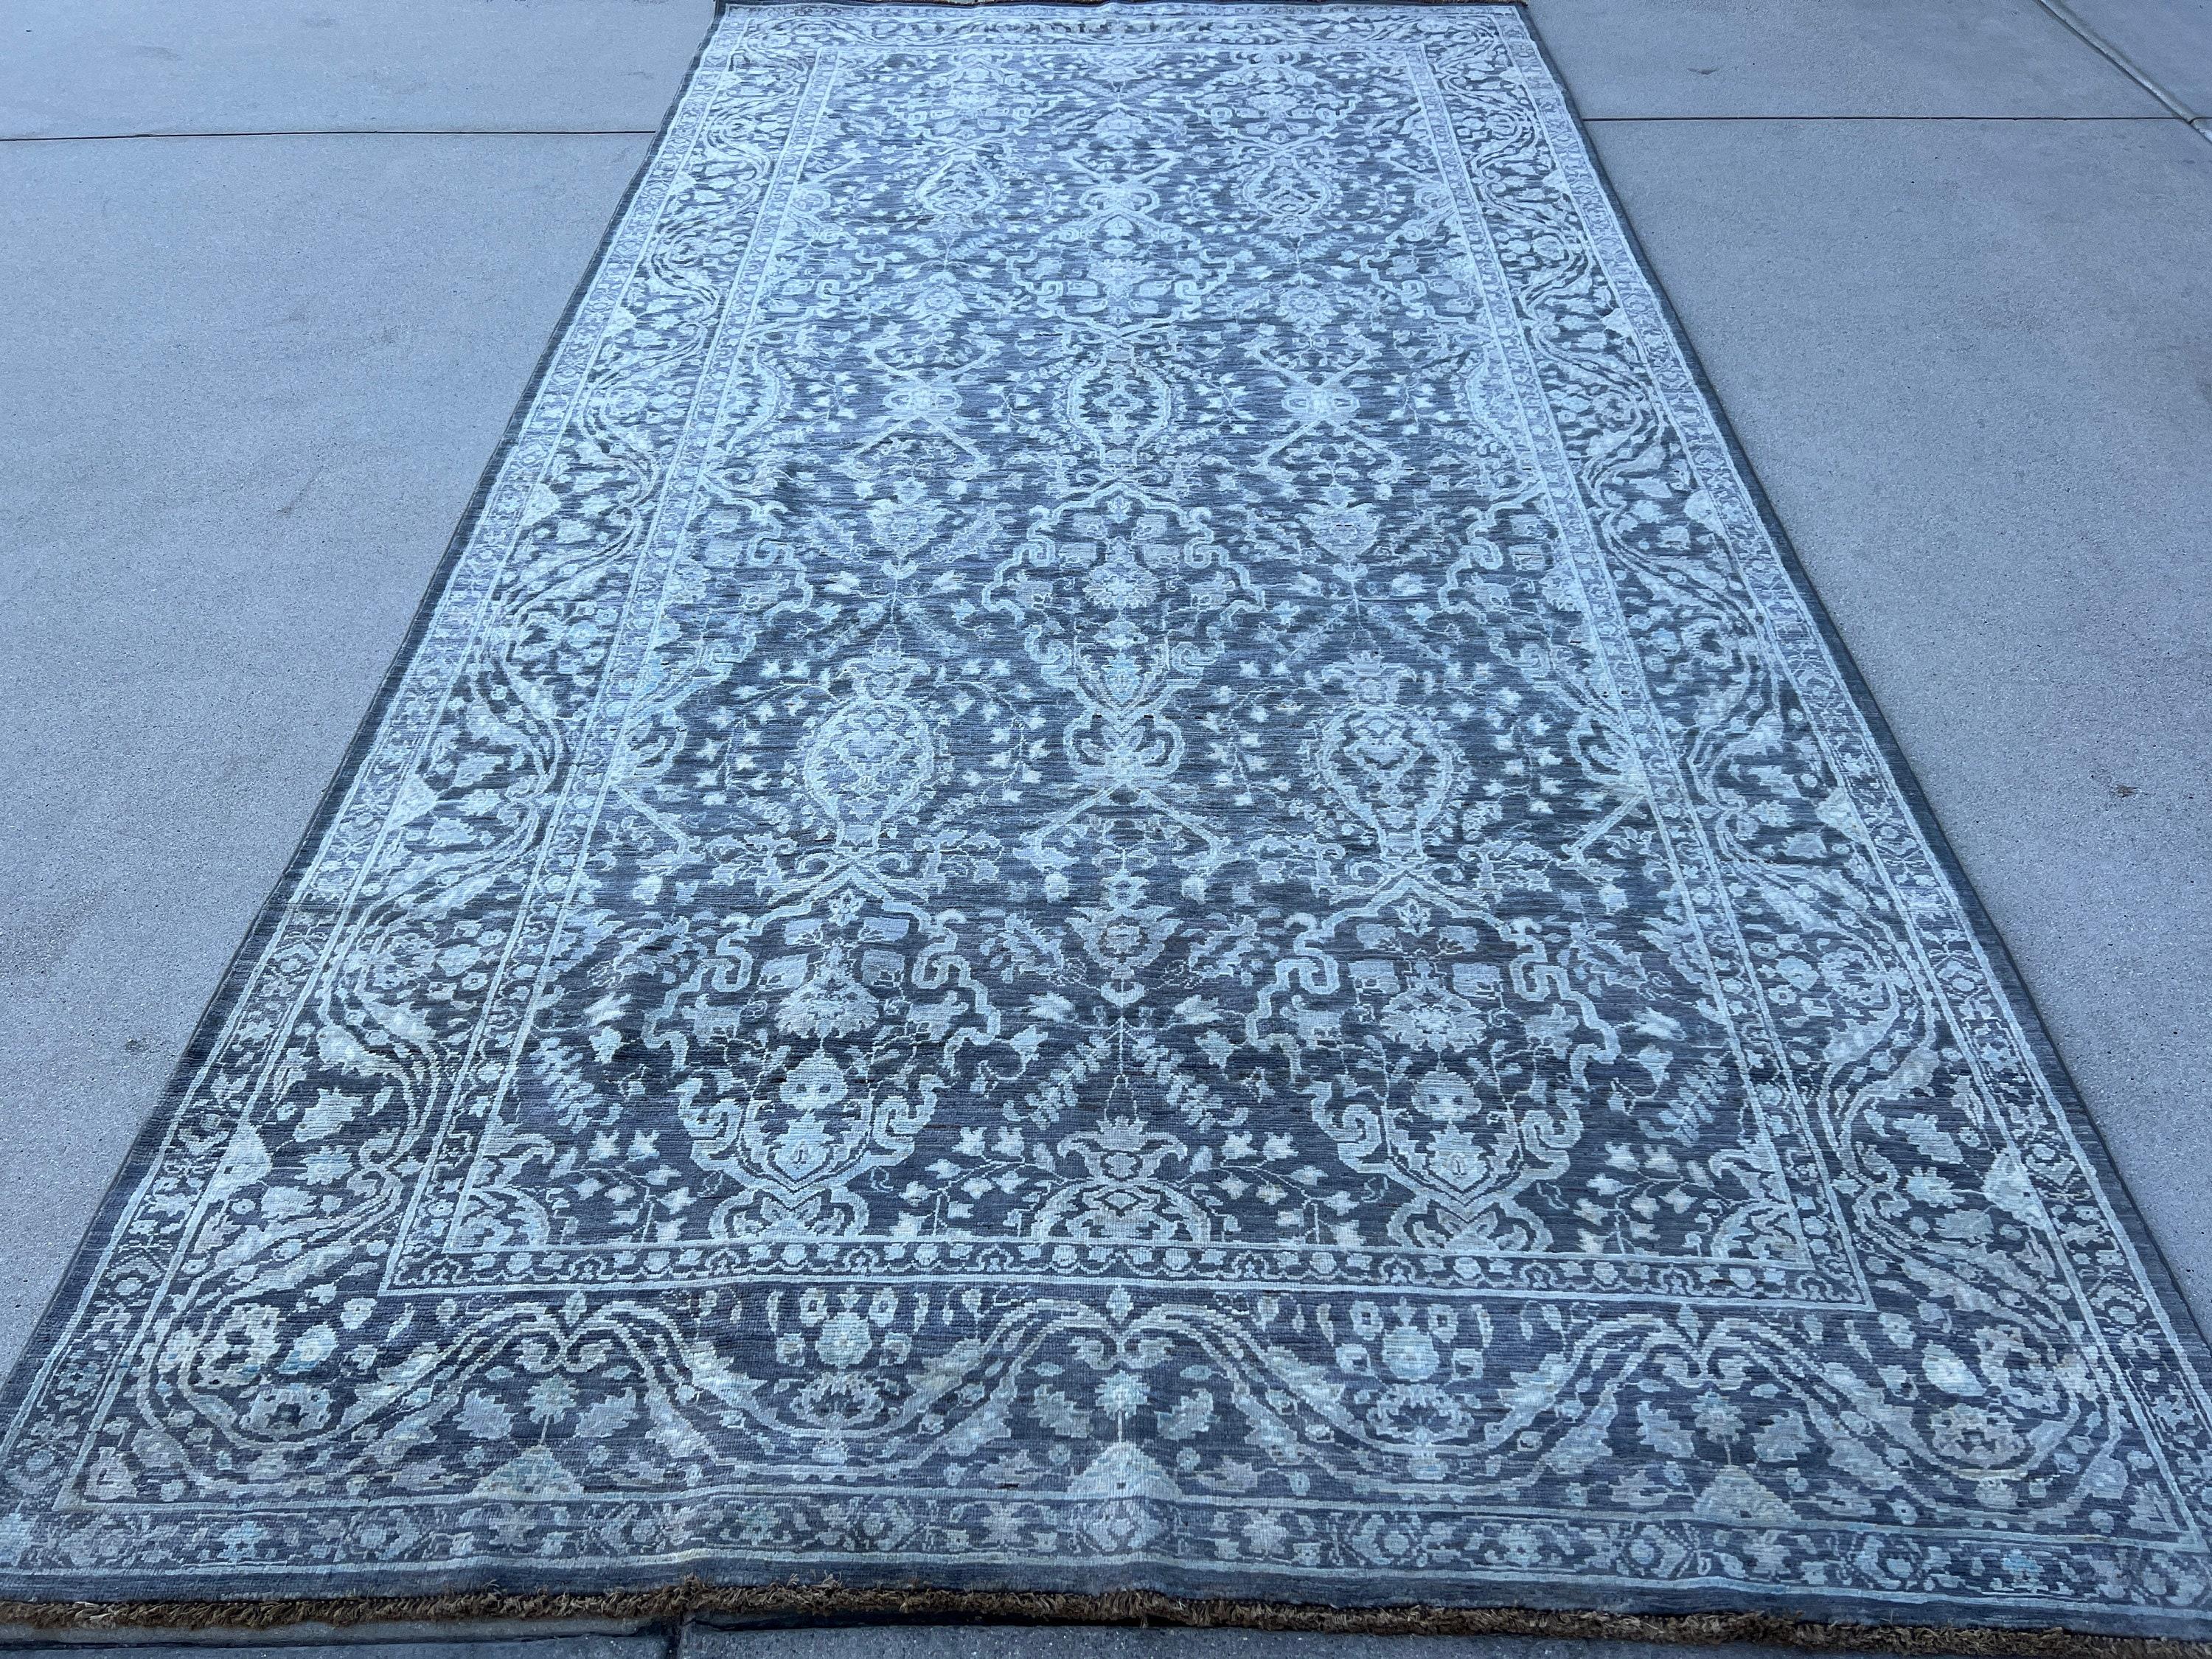 Hand-Knotted Afghan Rug Premium Hand-Spun Afghan Wool Fair Trade In New Condition For Sale In San Marcos, CA